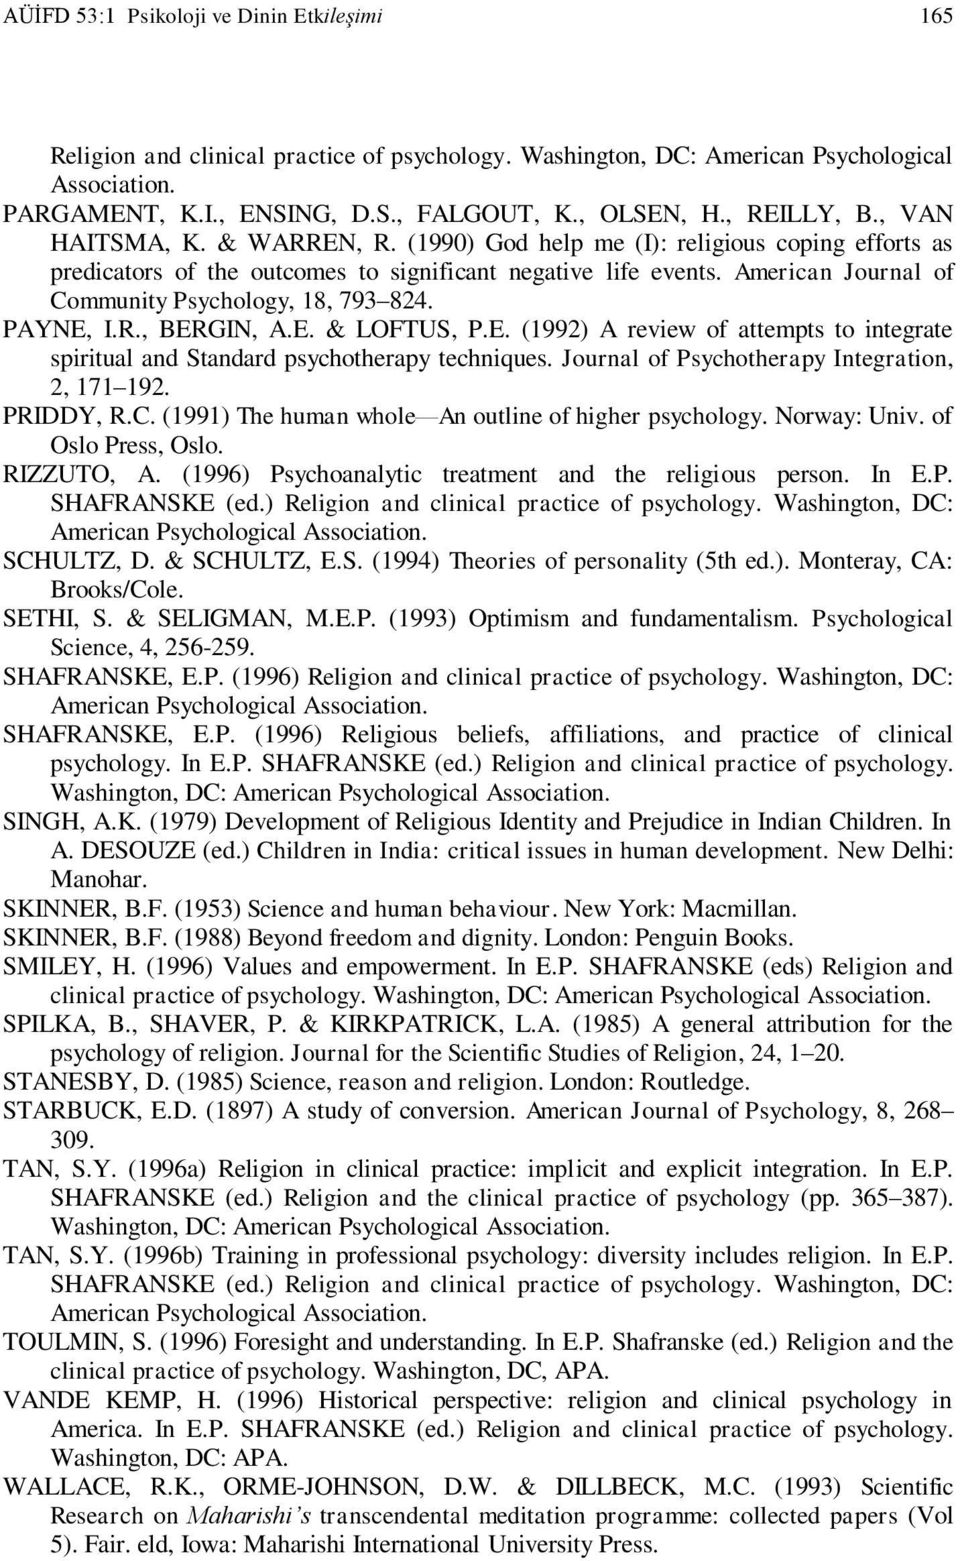 American Journal of Community Psychology, 18, 793 824. PAYNE, I.R., BERGIN, A.E. & LOFTUS, P.E. (1992) A review of attempts to integrate spiritual and Standard psychotherapy techniques.